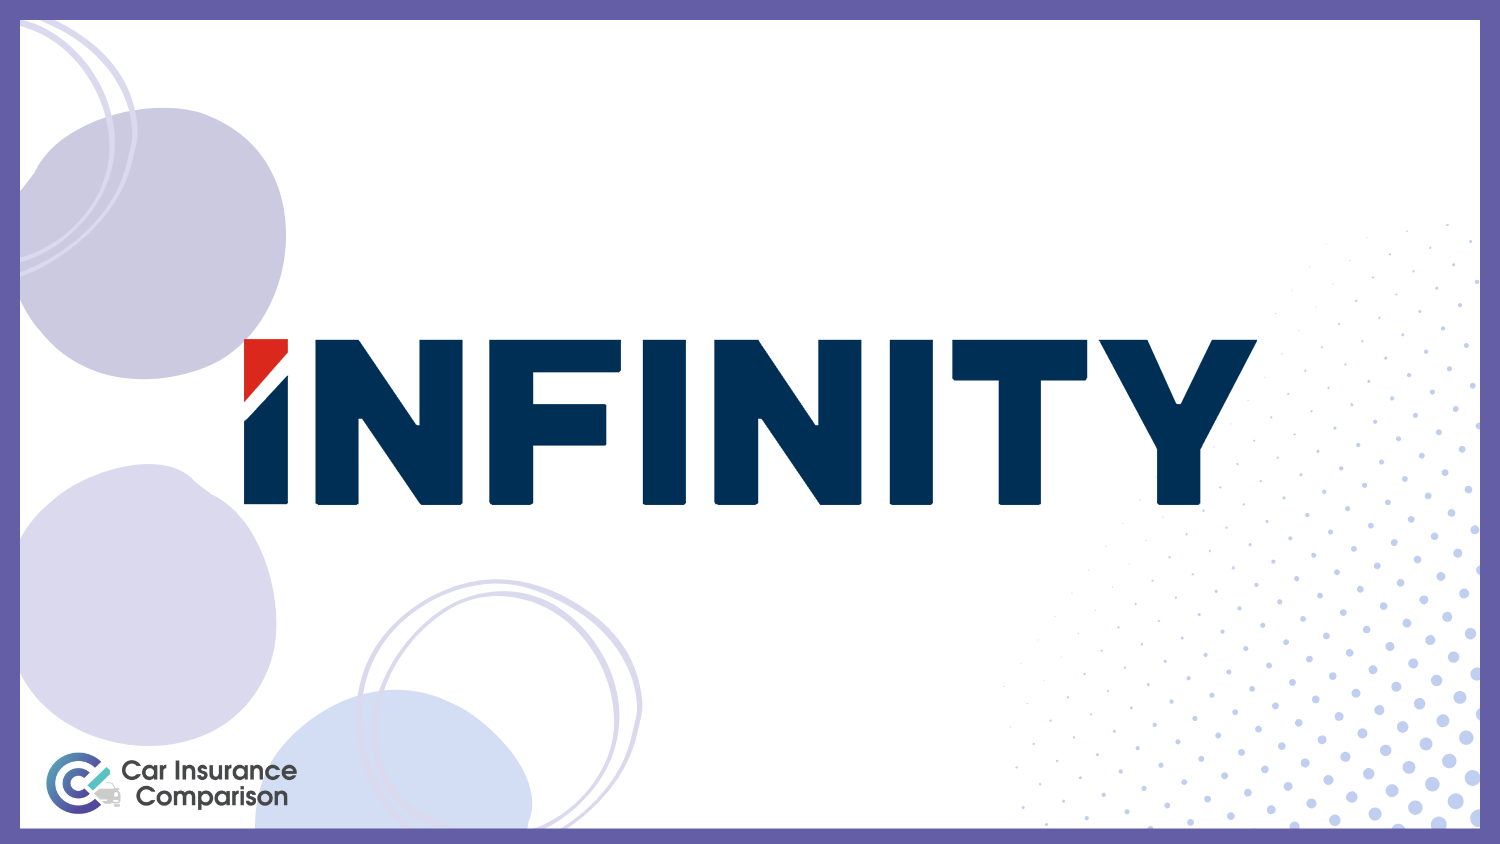 Infinity: Compare Best Car Insurance Companies That Accept a Suspended License